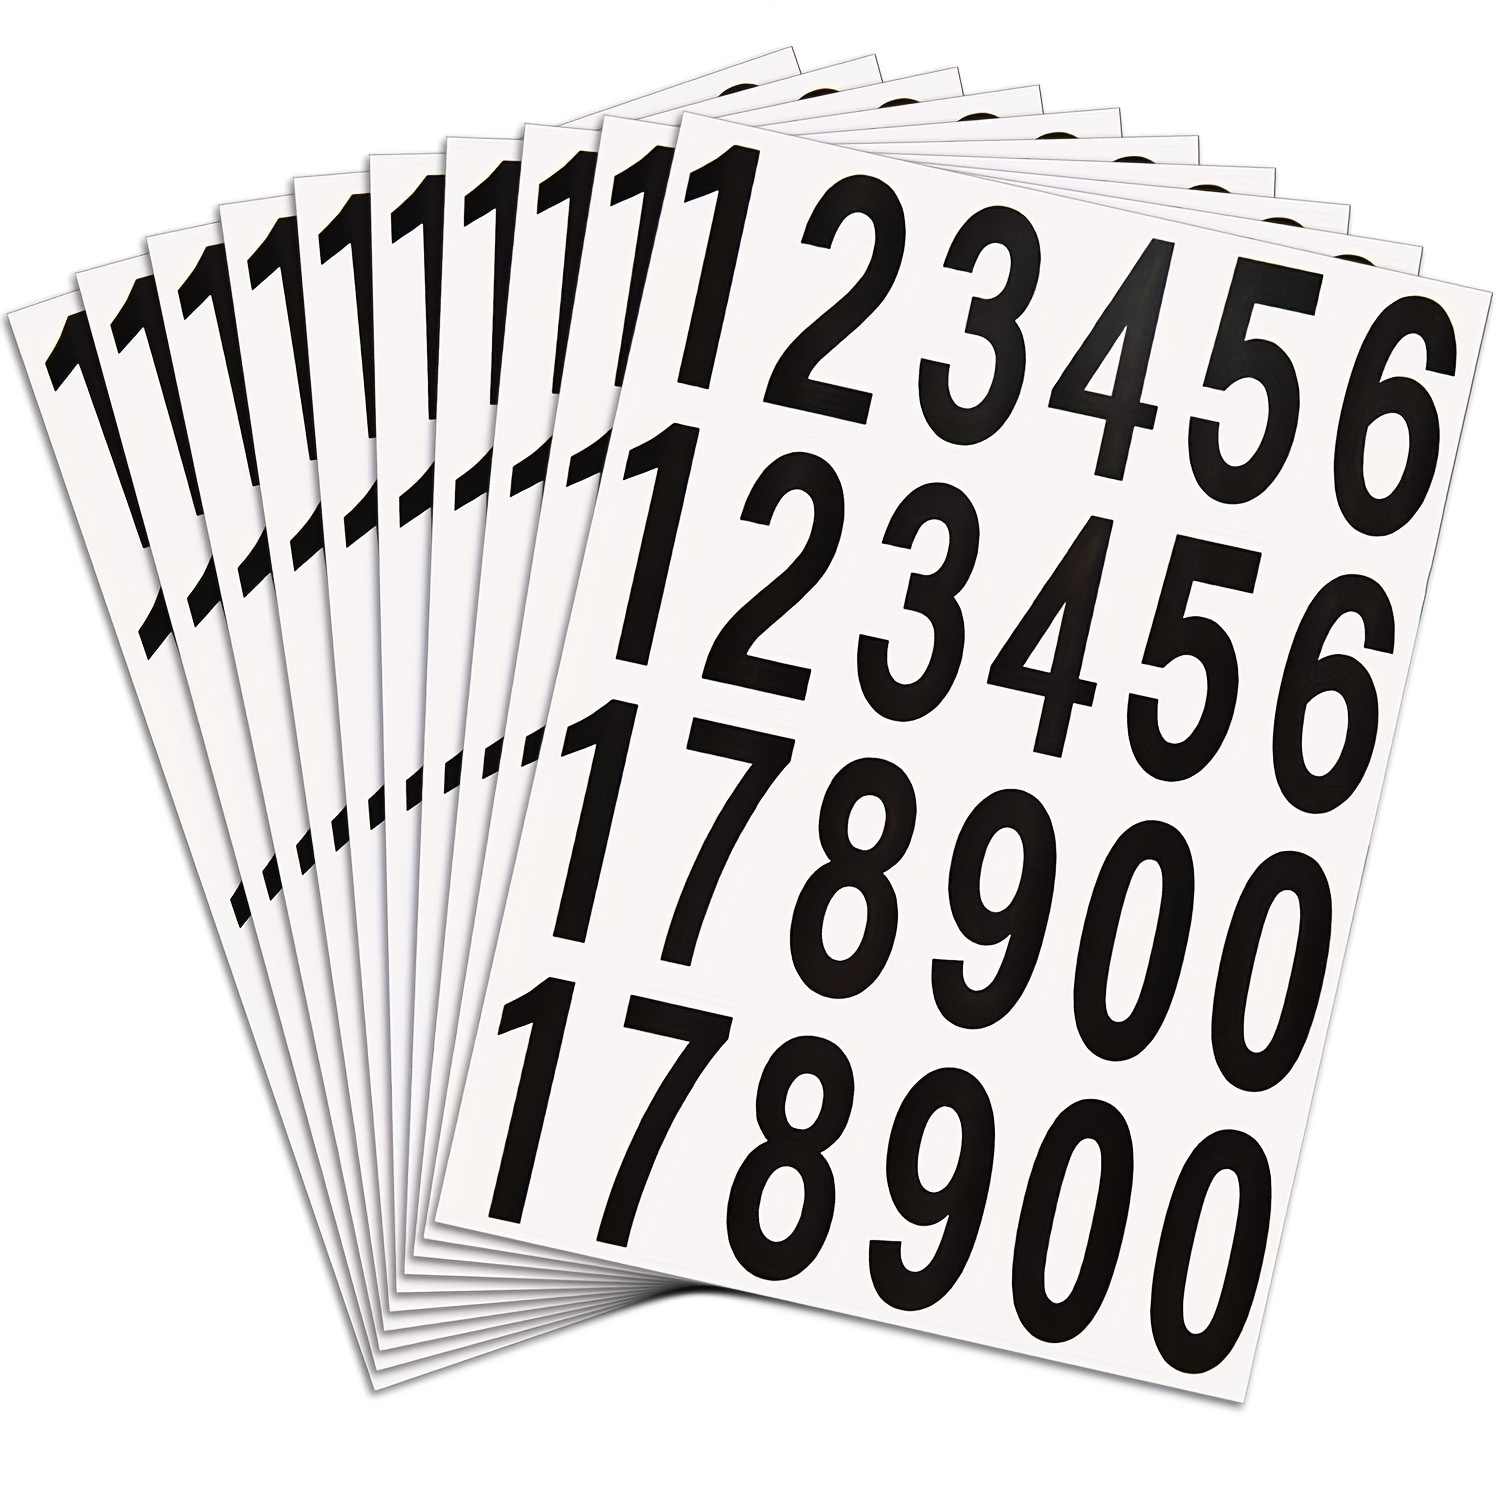 

120pcs /5sheets Numbers Stickers Mailbox Numbers Self Adhesive Vinyl Numbers For Residence And Mailbox Signs (2 Inch, Black On White)